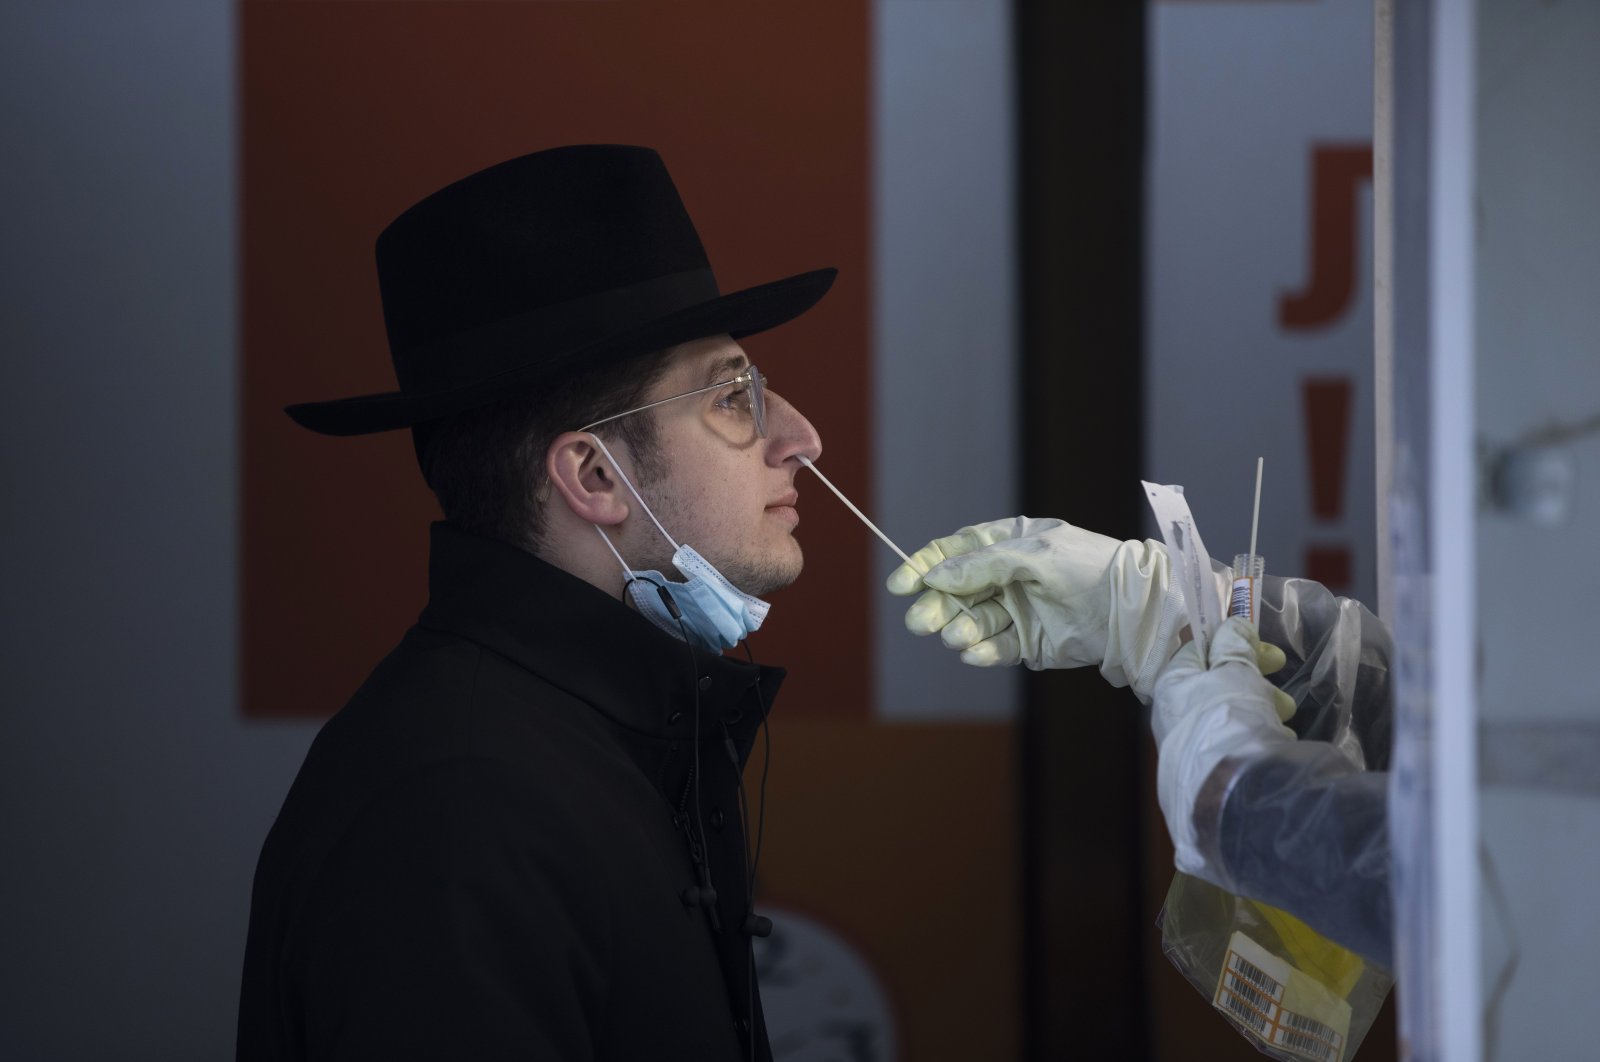 An Israeli health worker tests an unvaccinated ultra-Orthodox Jewish seminary student for COVID-19 at a coronavirus testing center in West Jerusalem, Israel, Dec. 22, 2021. (AP Photo)